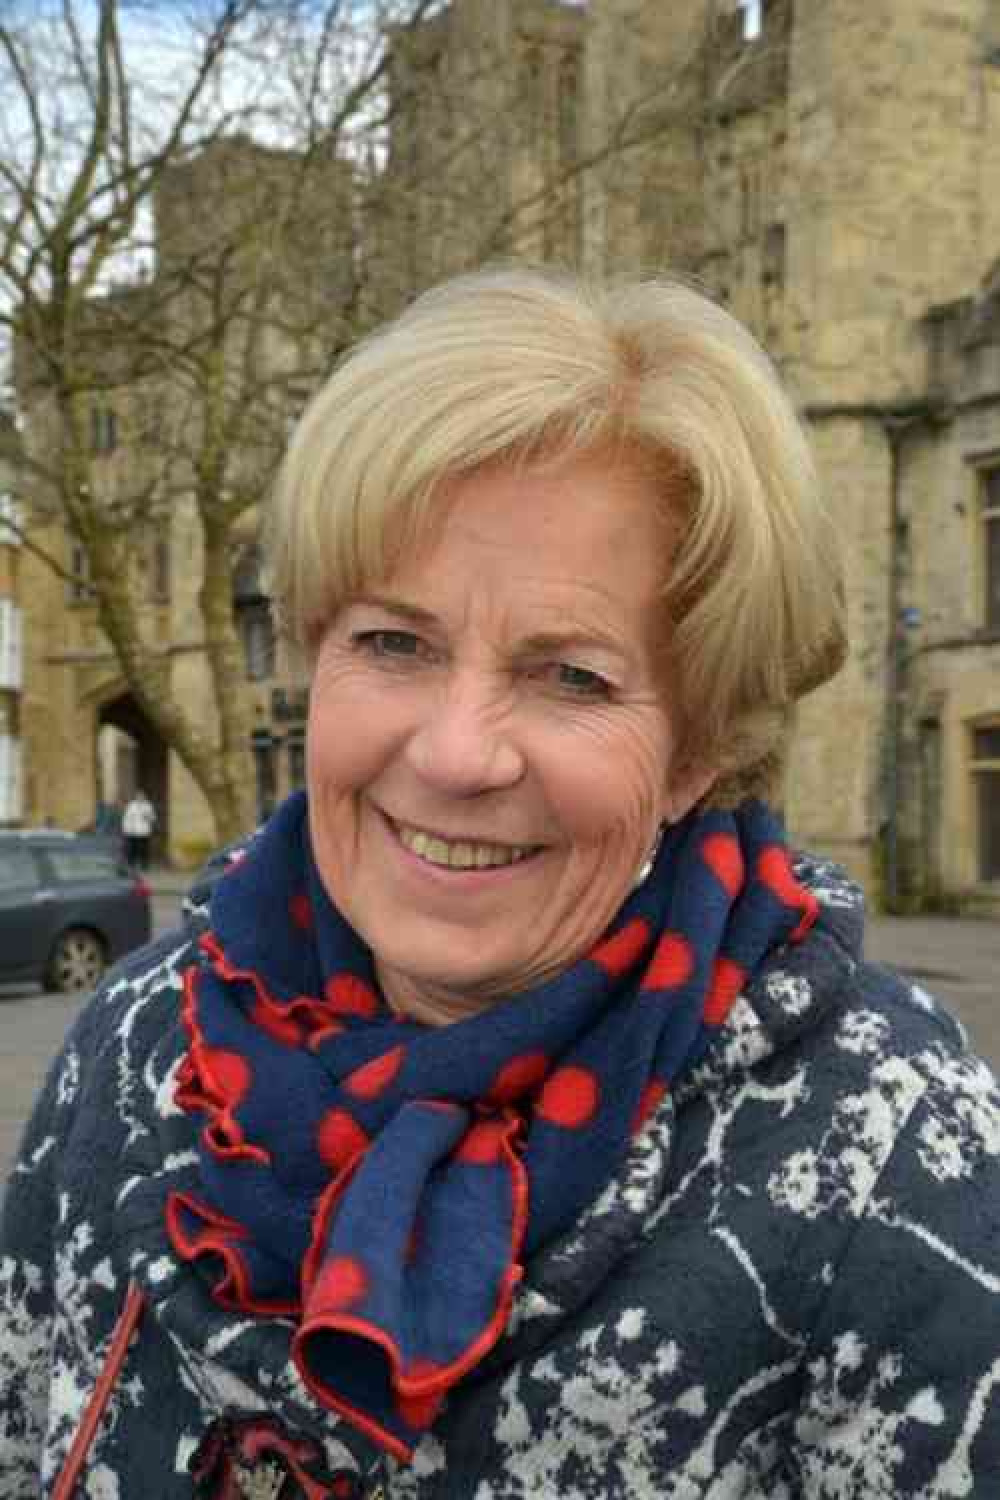 The Lord-Lieutenant of Somerset, Annie Maw